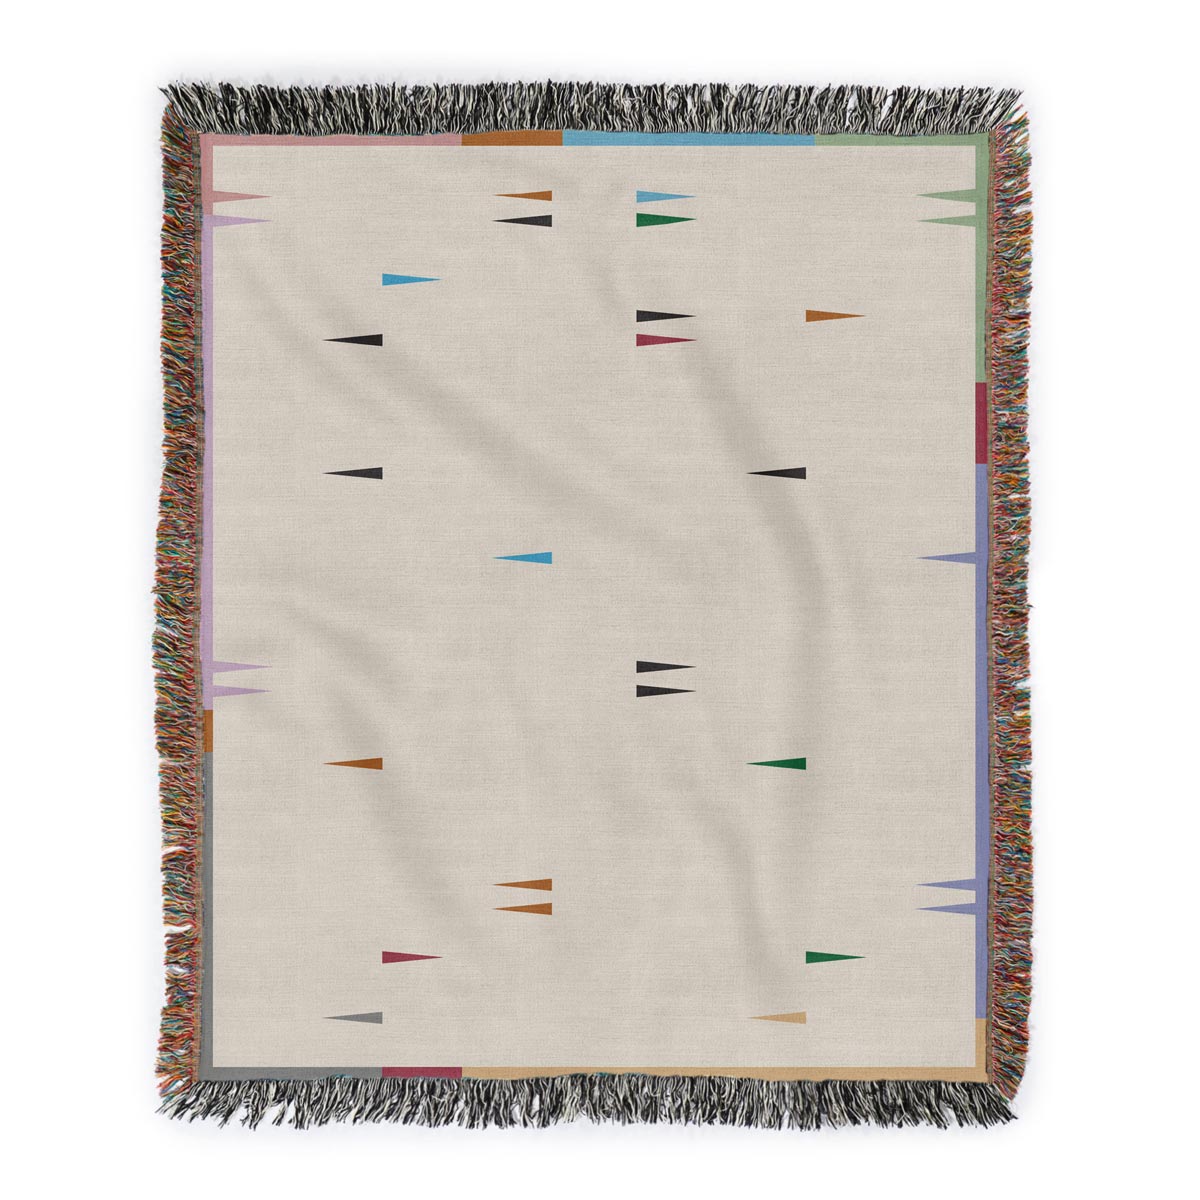 Fula V (dawn) – off-white woven throw blanket with colorful triangles